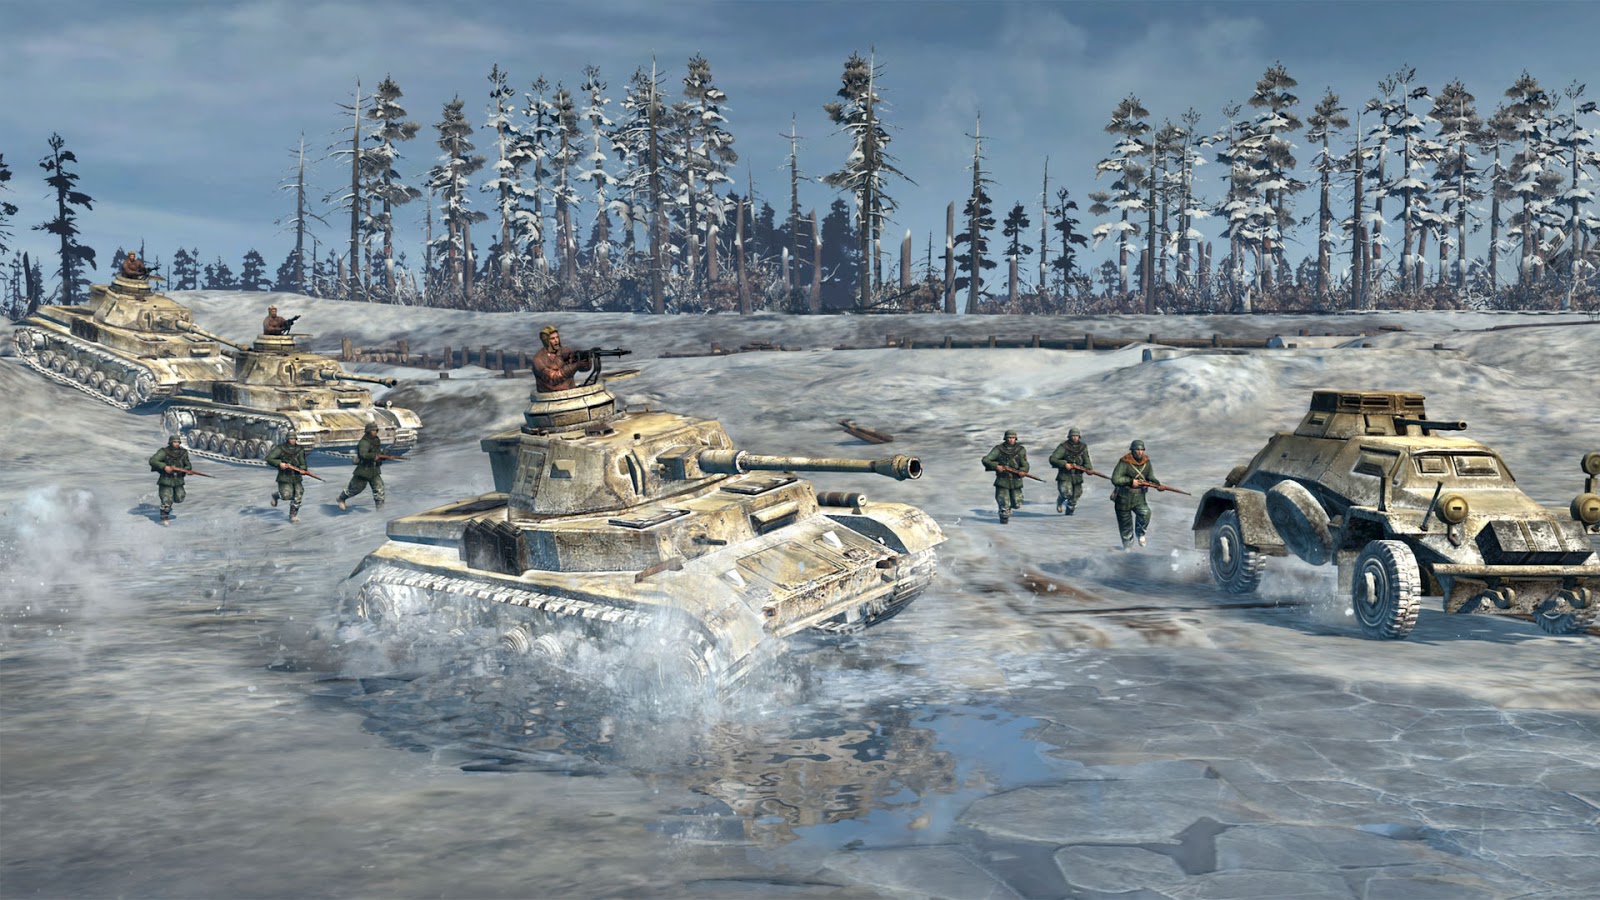 free download company of heroes 2 dlc